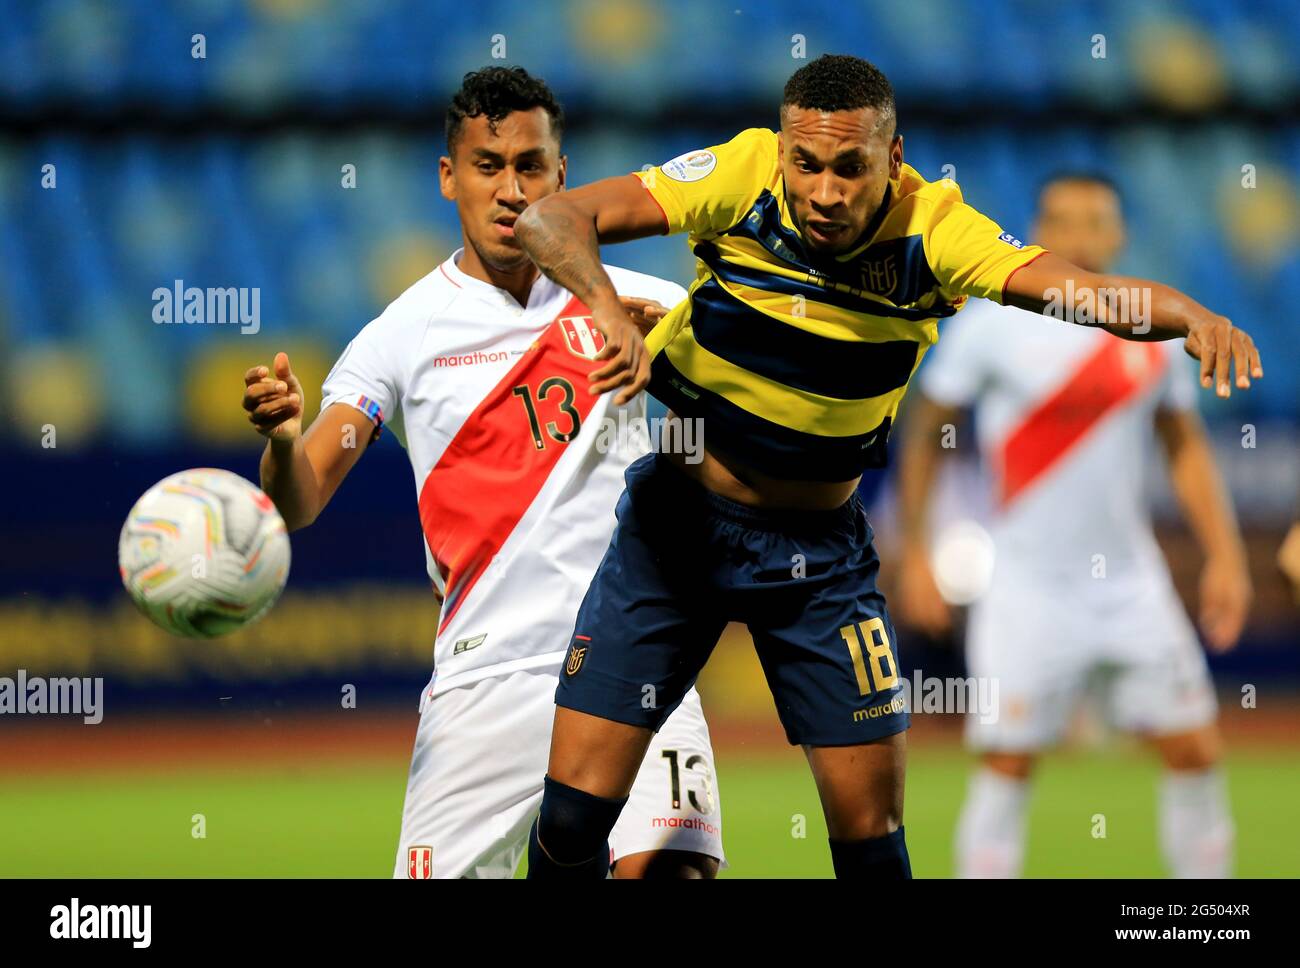 GOIANIA, BRAZIL - JUNE 23: Ayrton Preciado of Ecuador competes for the ball with Renato Tapia of Peru ,during the match between Colombia and Peru as part of Conmebol Copa America Brazil 2021 at Estadio Olimpico on June 23, 2021 in Goiania, Brazil. MB Media Stock Photo